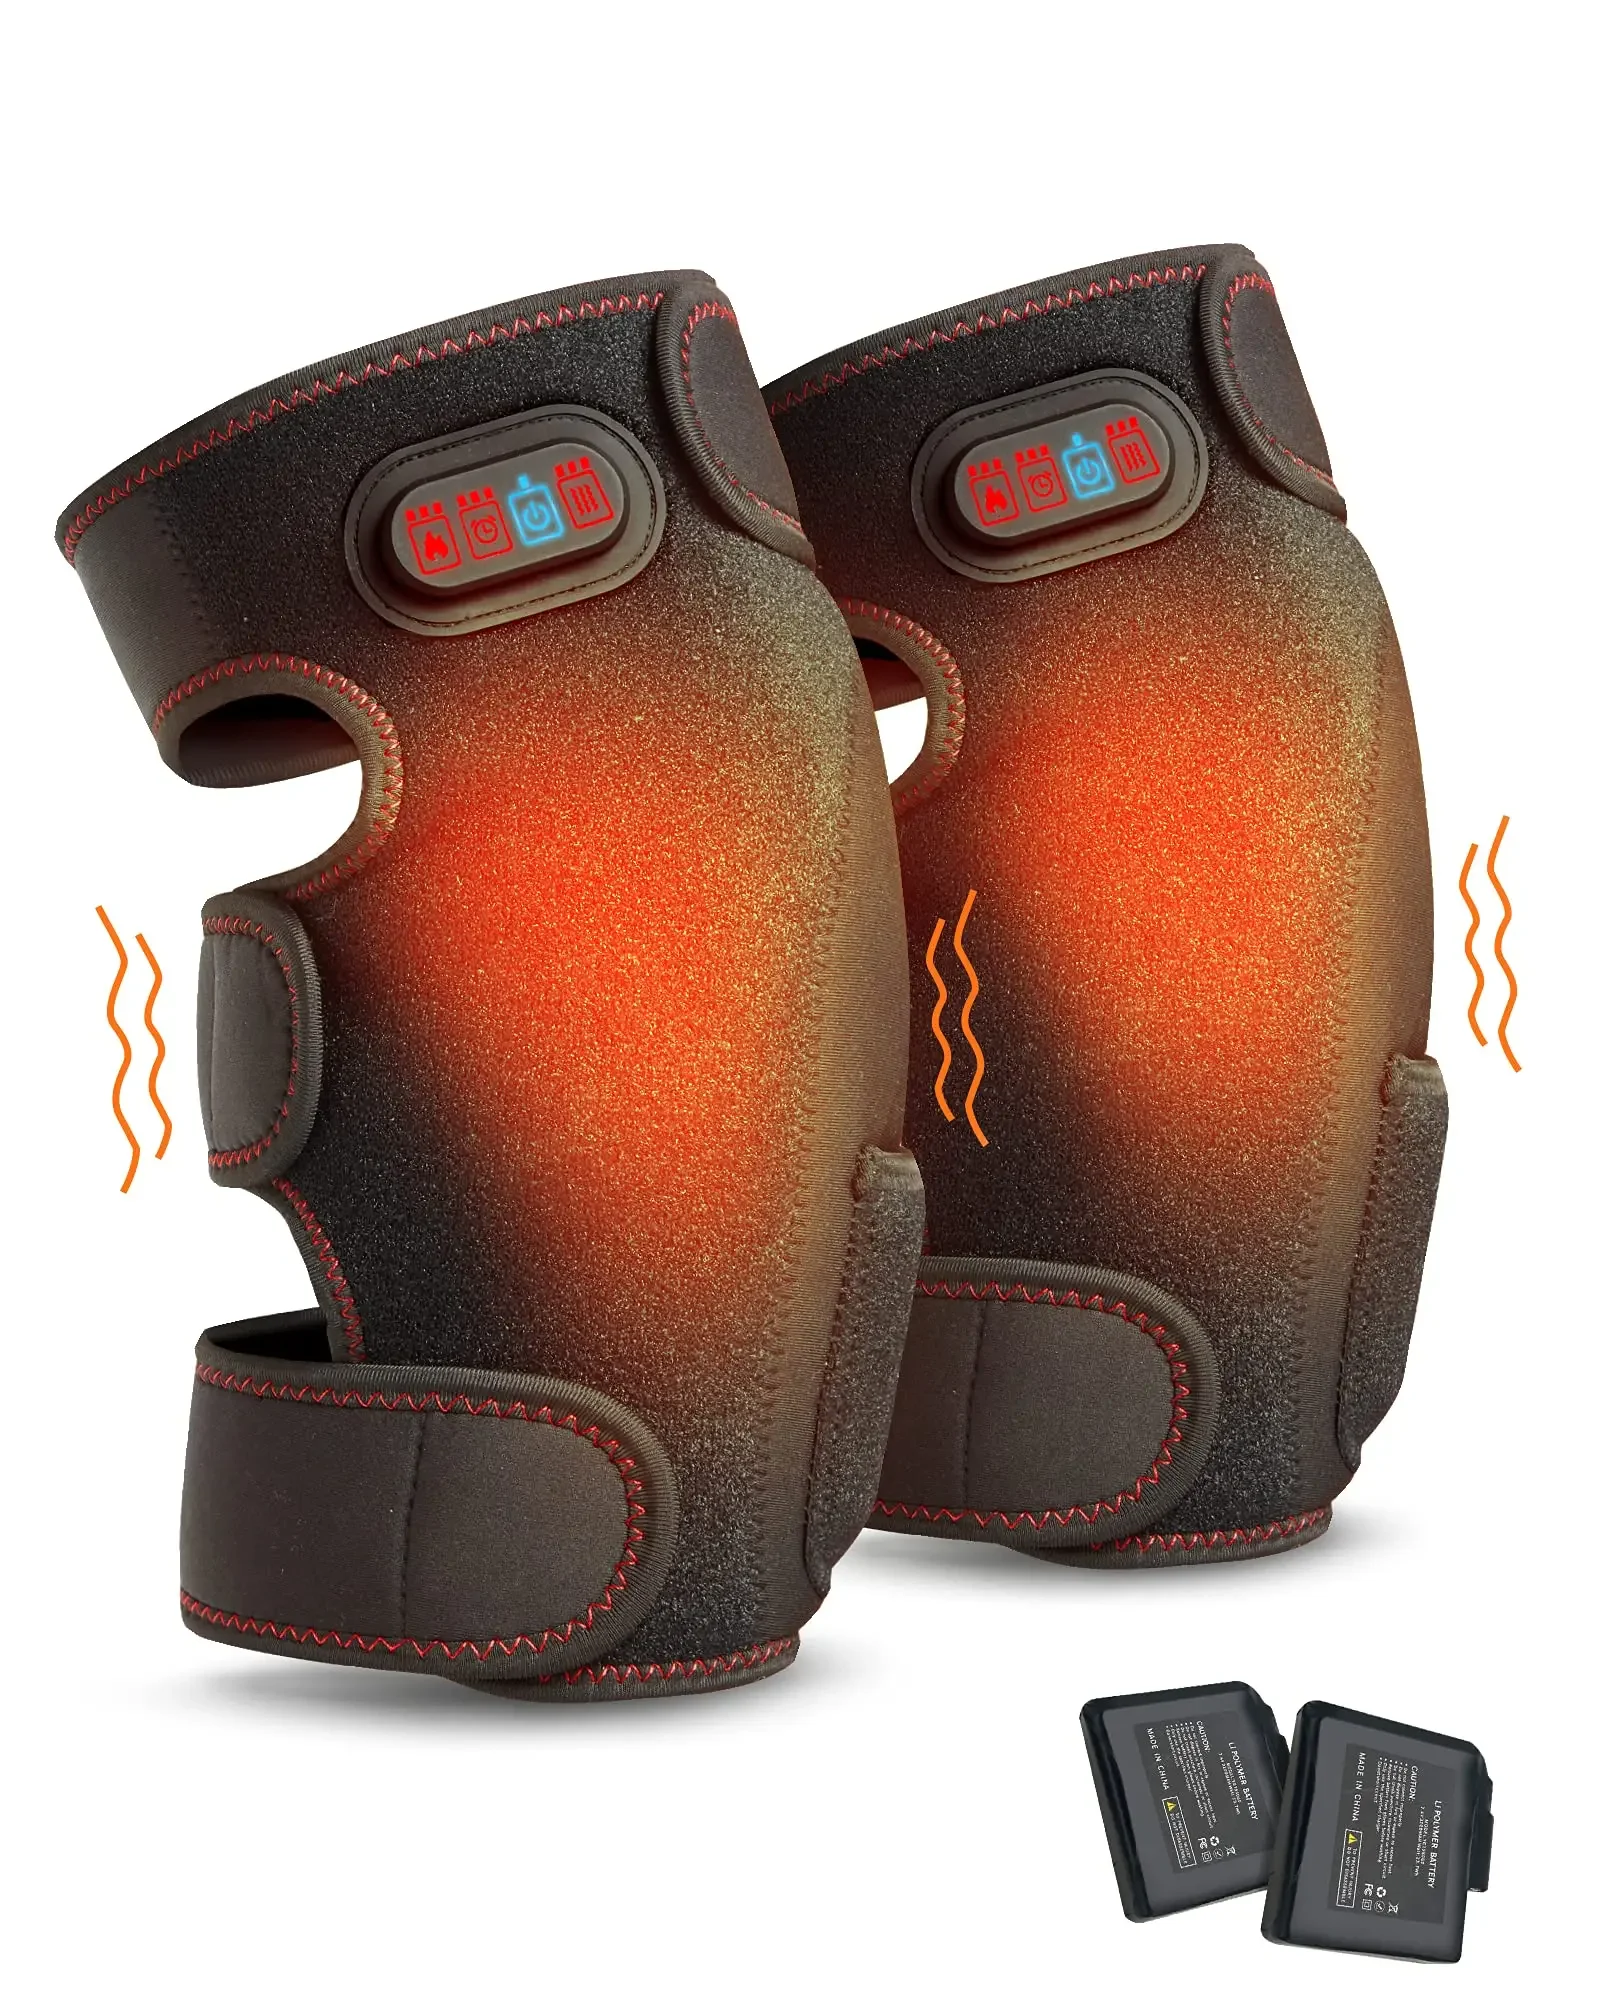 Heated Knee Brace Wrap - Battery Powered Knee Heating Pad Vibration Massager for Knee Pain Relief (1 Pair) flying tern heated gloves battery powered touchscreen waterproof heating gloves winter warm ski gloves for climbing hiking cycling motorcycling skiing snowboarding